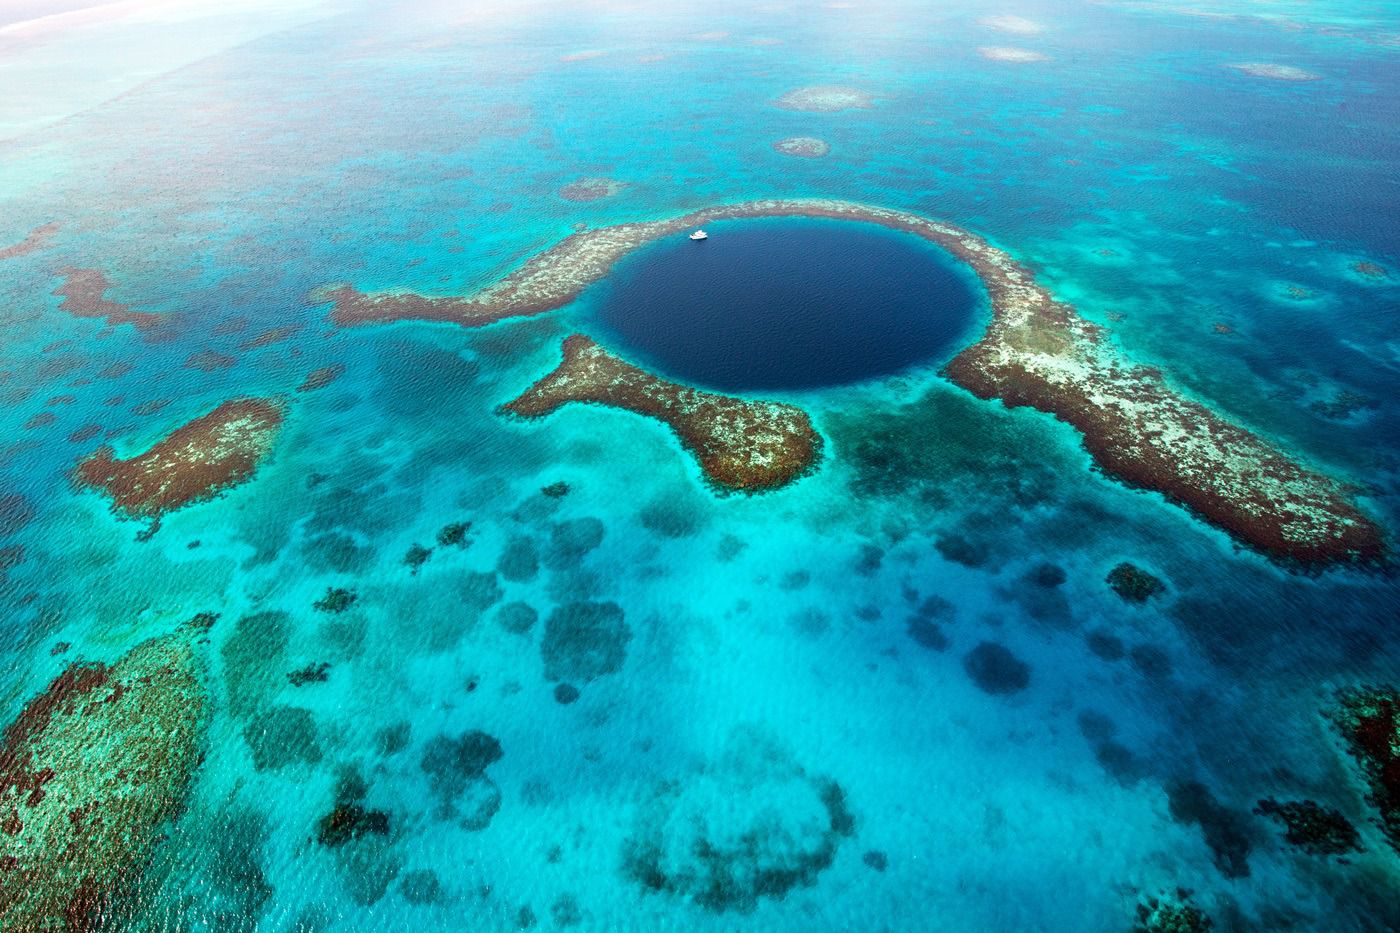 You’ve Got 15 Questions to Prove You Have a Ton of General Knowledge Belize